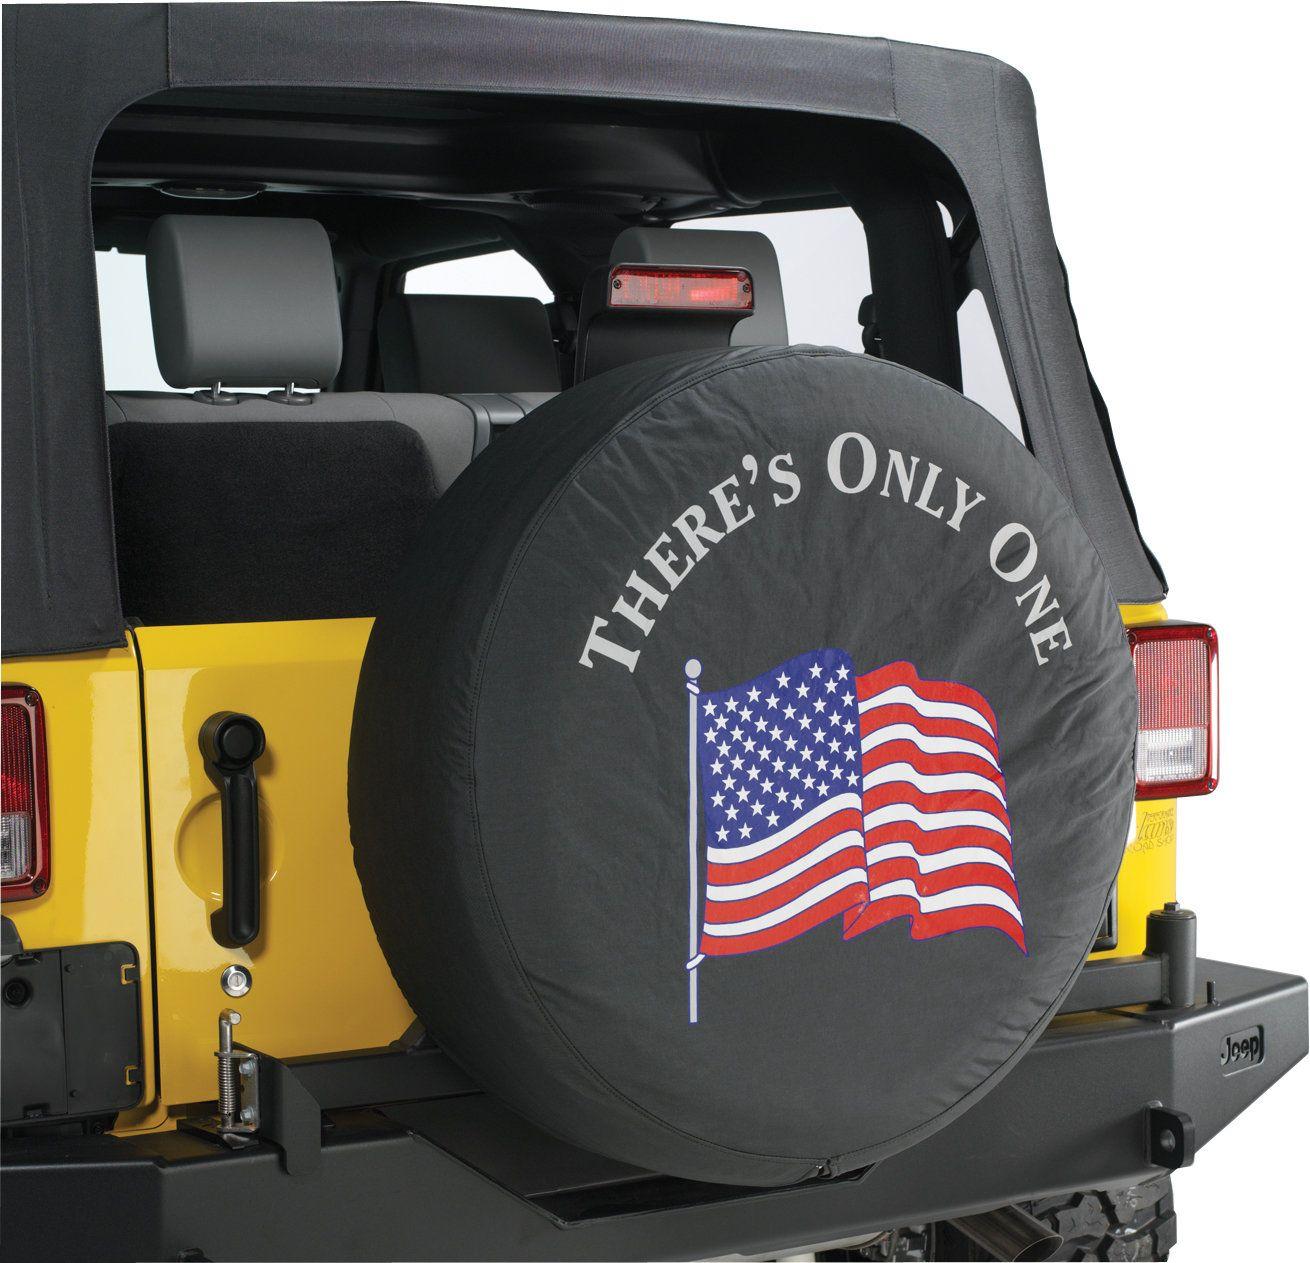 Only in a Jeep Logo - Mopar Jeep Logo Tire Covers in Black Denim with American Flag ...